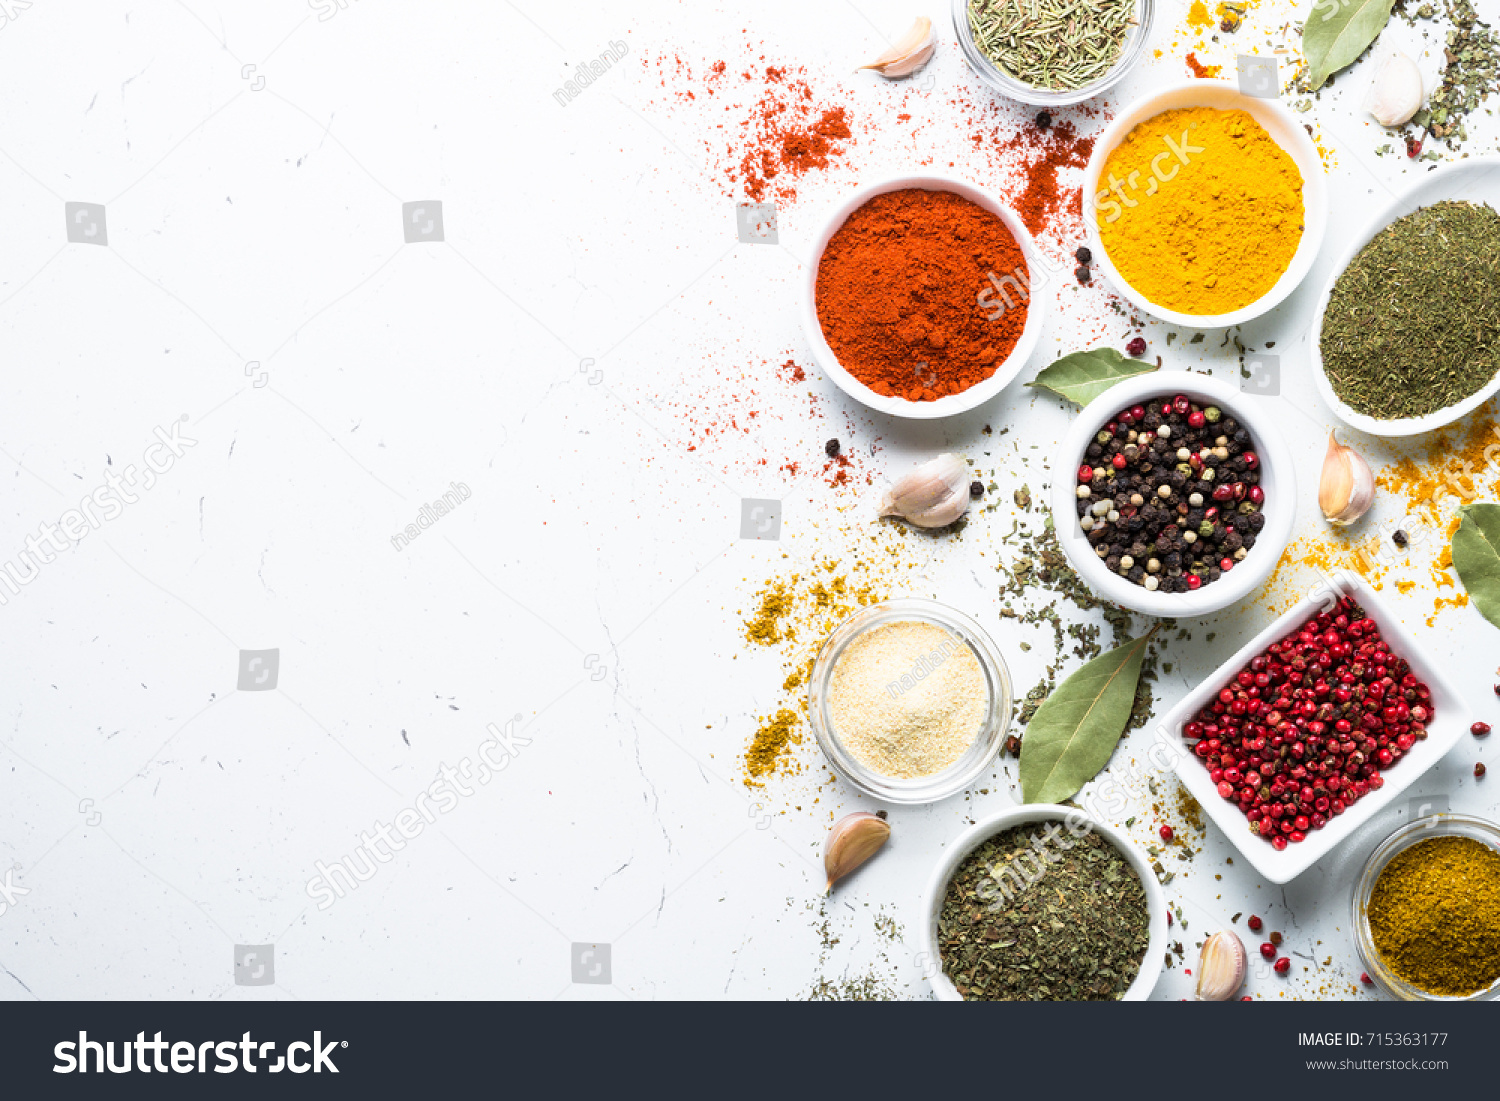 Set of various spices in a bowls on white background. Top view copy space. #715363177